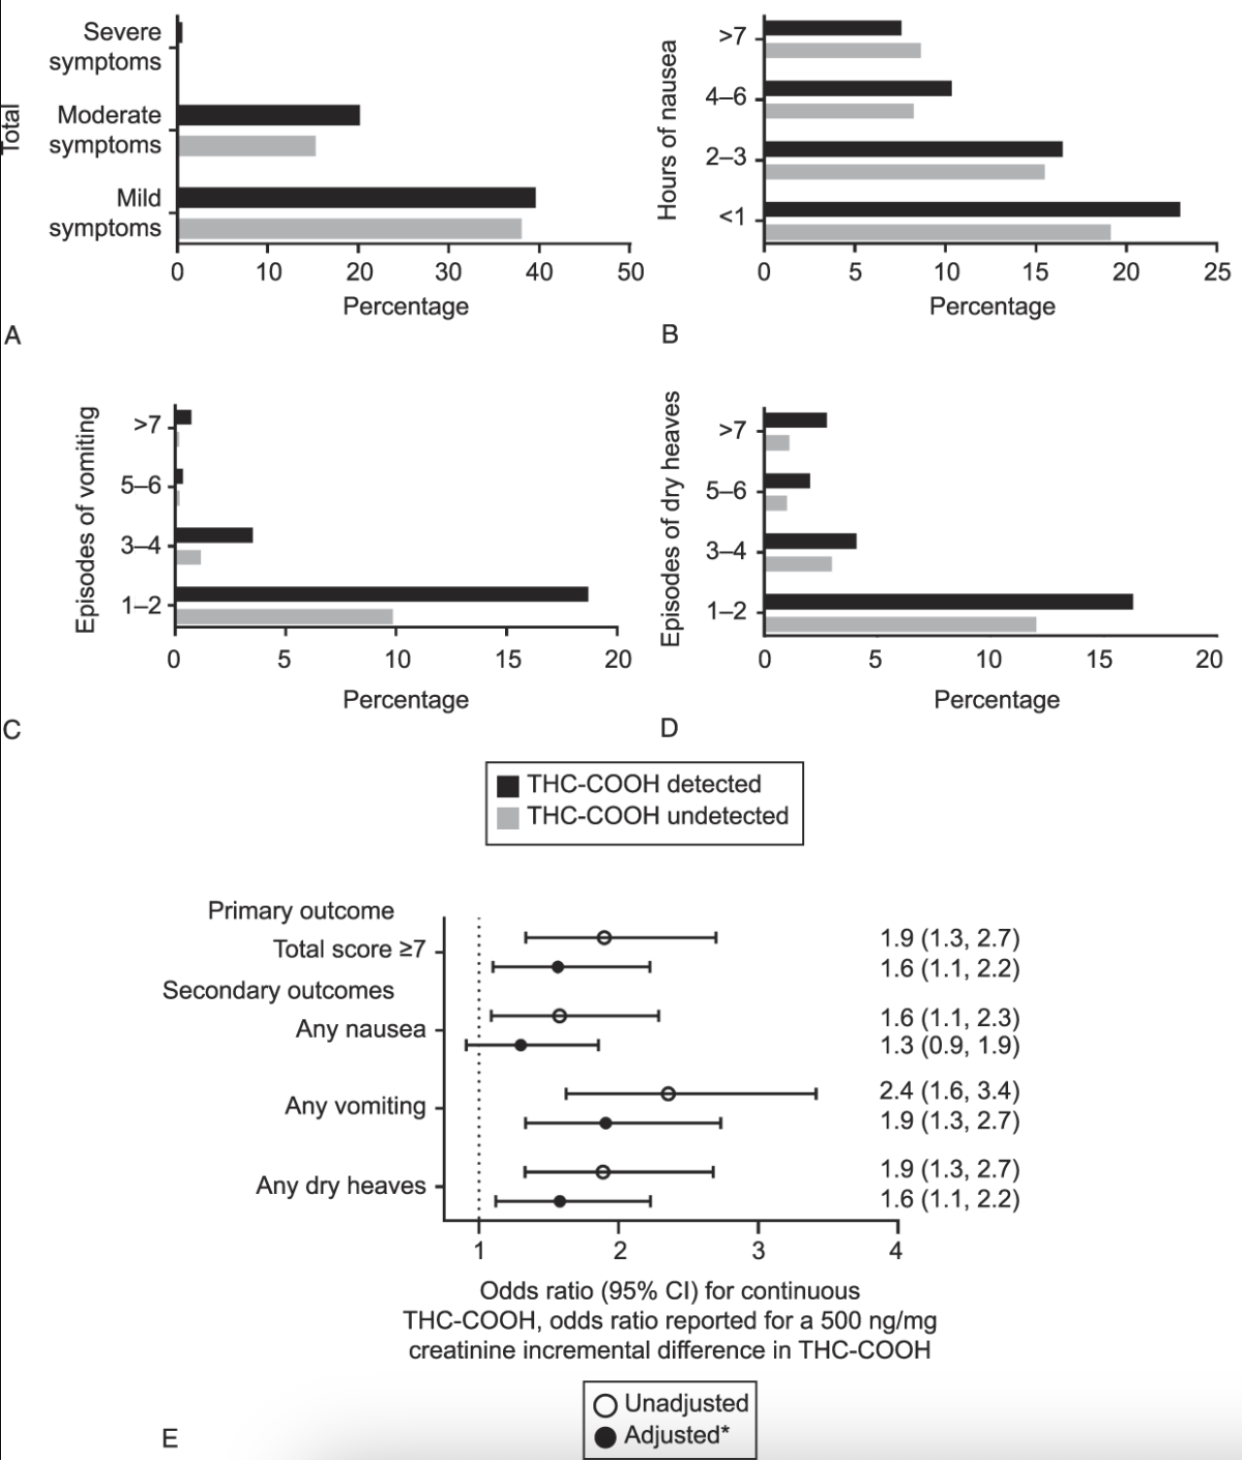 Descriptive survey data from the Pregnancy-Unique Quantification of Emesis (PUQE) tool for the total PUQE score (A) and components of PUQE score (hours of nausea [B], episodes of vomiting [C], and episodes of dry heaves [D]) among those with and without detectable urine 11-nor-9-carboxy-delta-9-tetrahydrocannabinol (THC-COOH). The PUQE score evaluates symptoms over the previous 12 hours. E. Logistic regression model results for the association between THC-COOH and the primary outcome. 